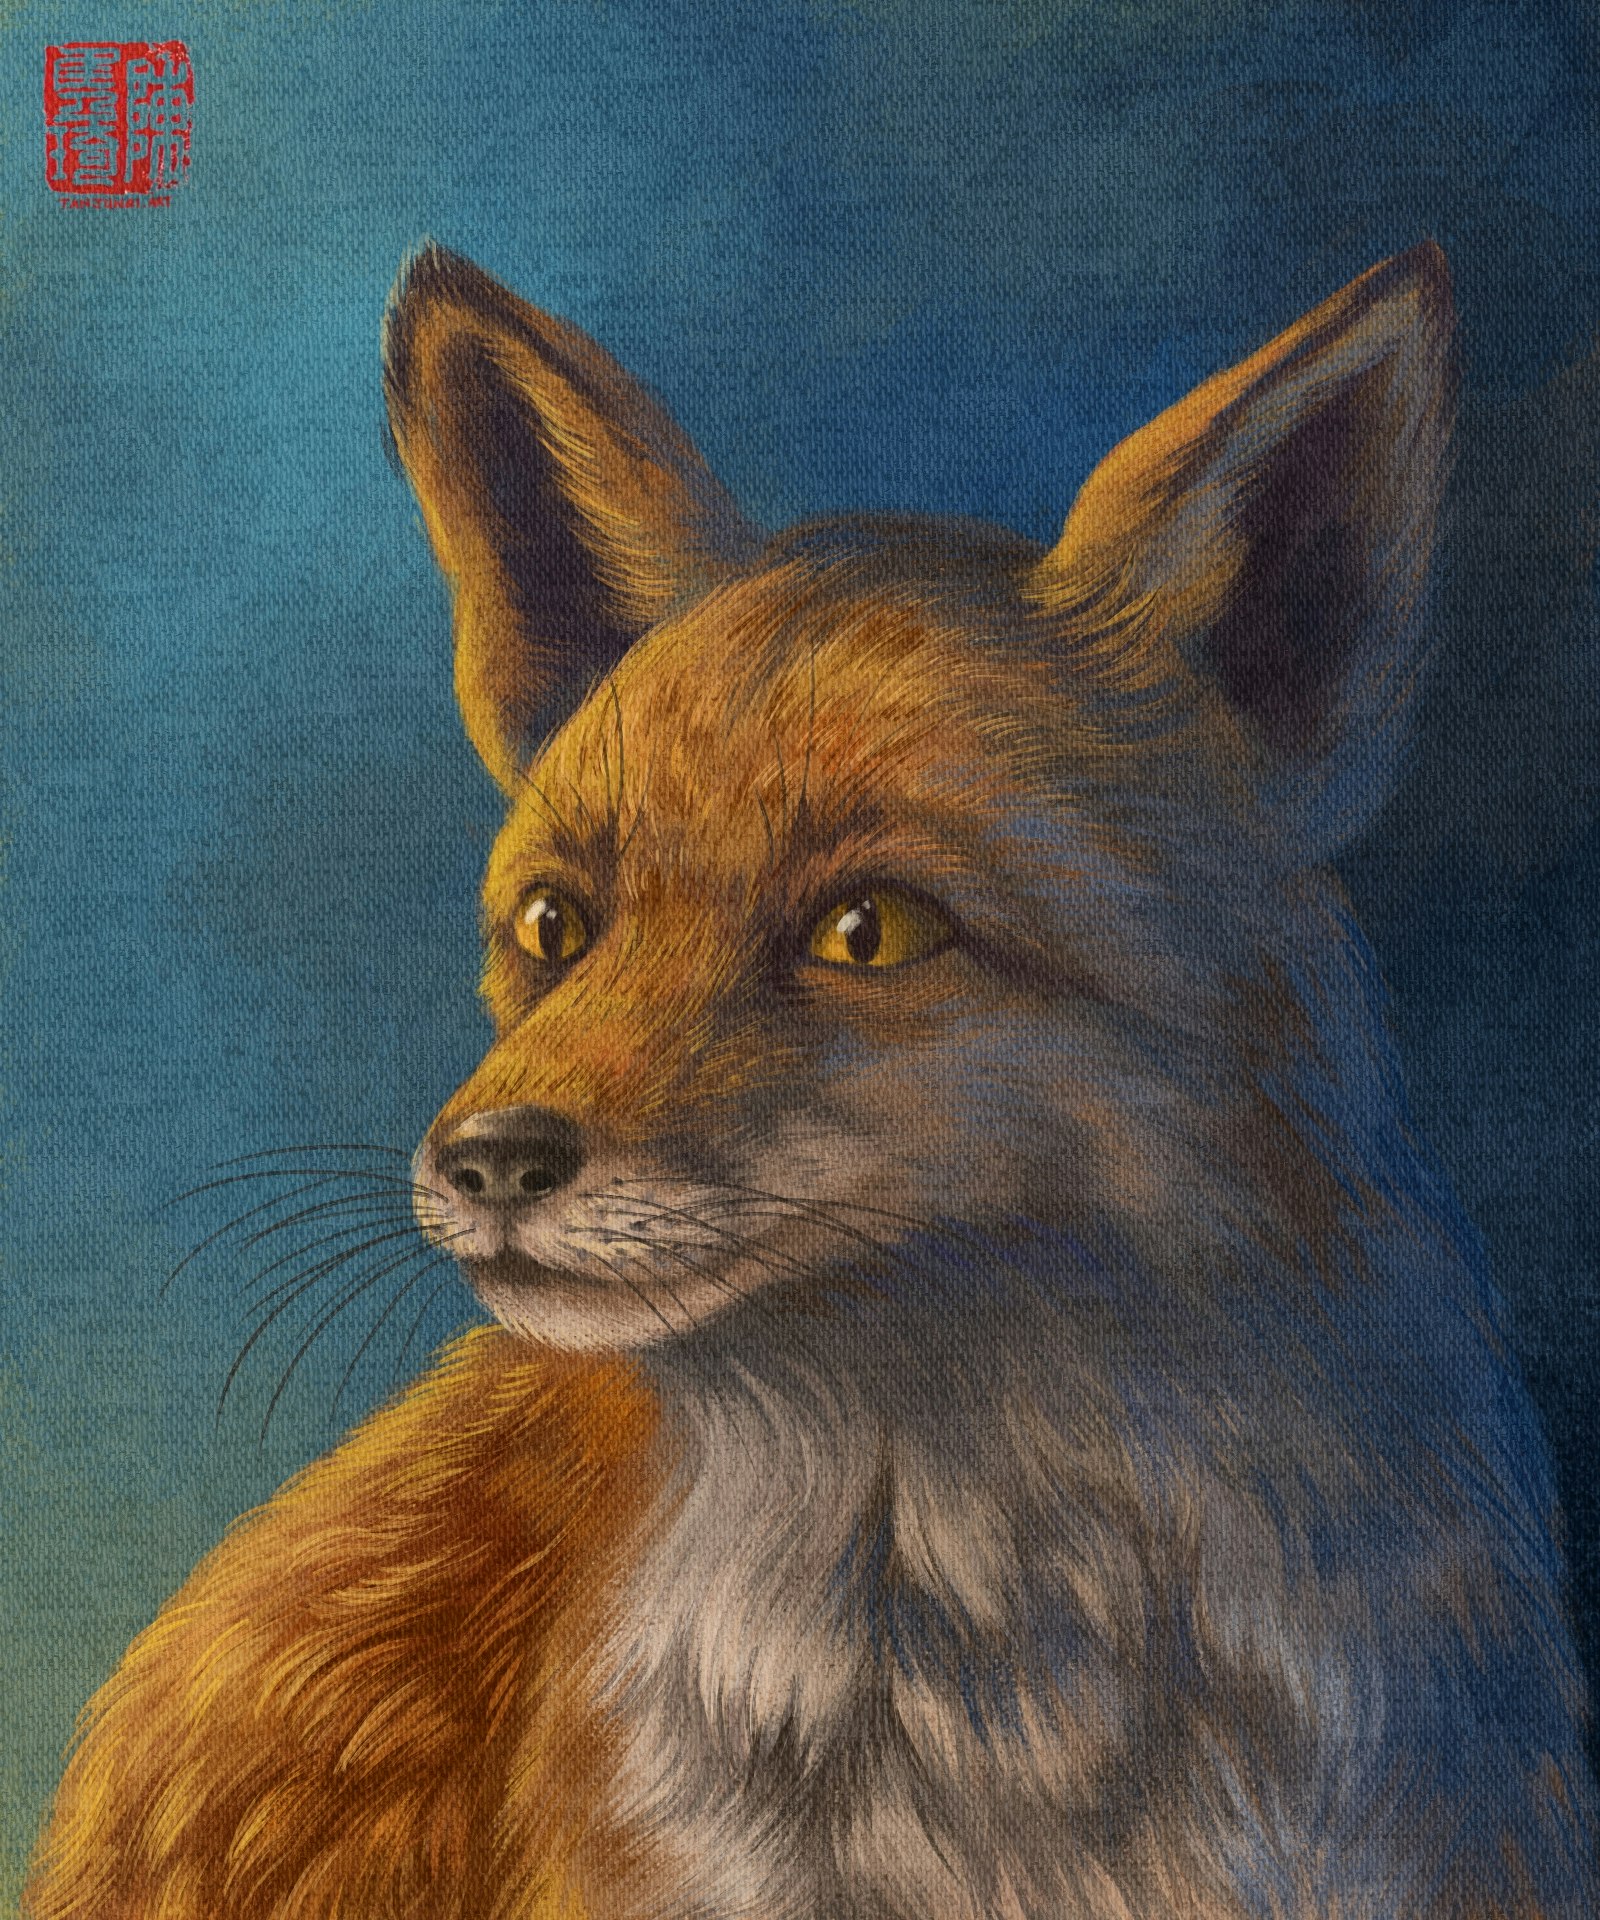 Digital painting close-up of a red fox, from its bust upward. The fox has its ears perked and is looking three-quarters to the left.